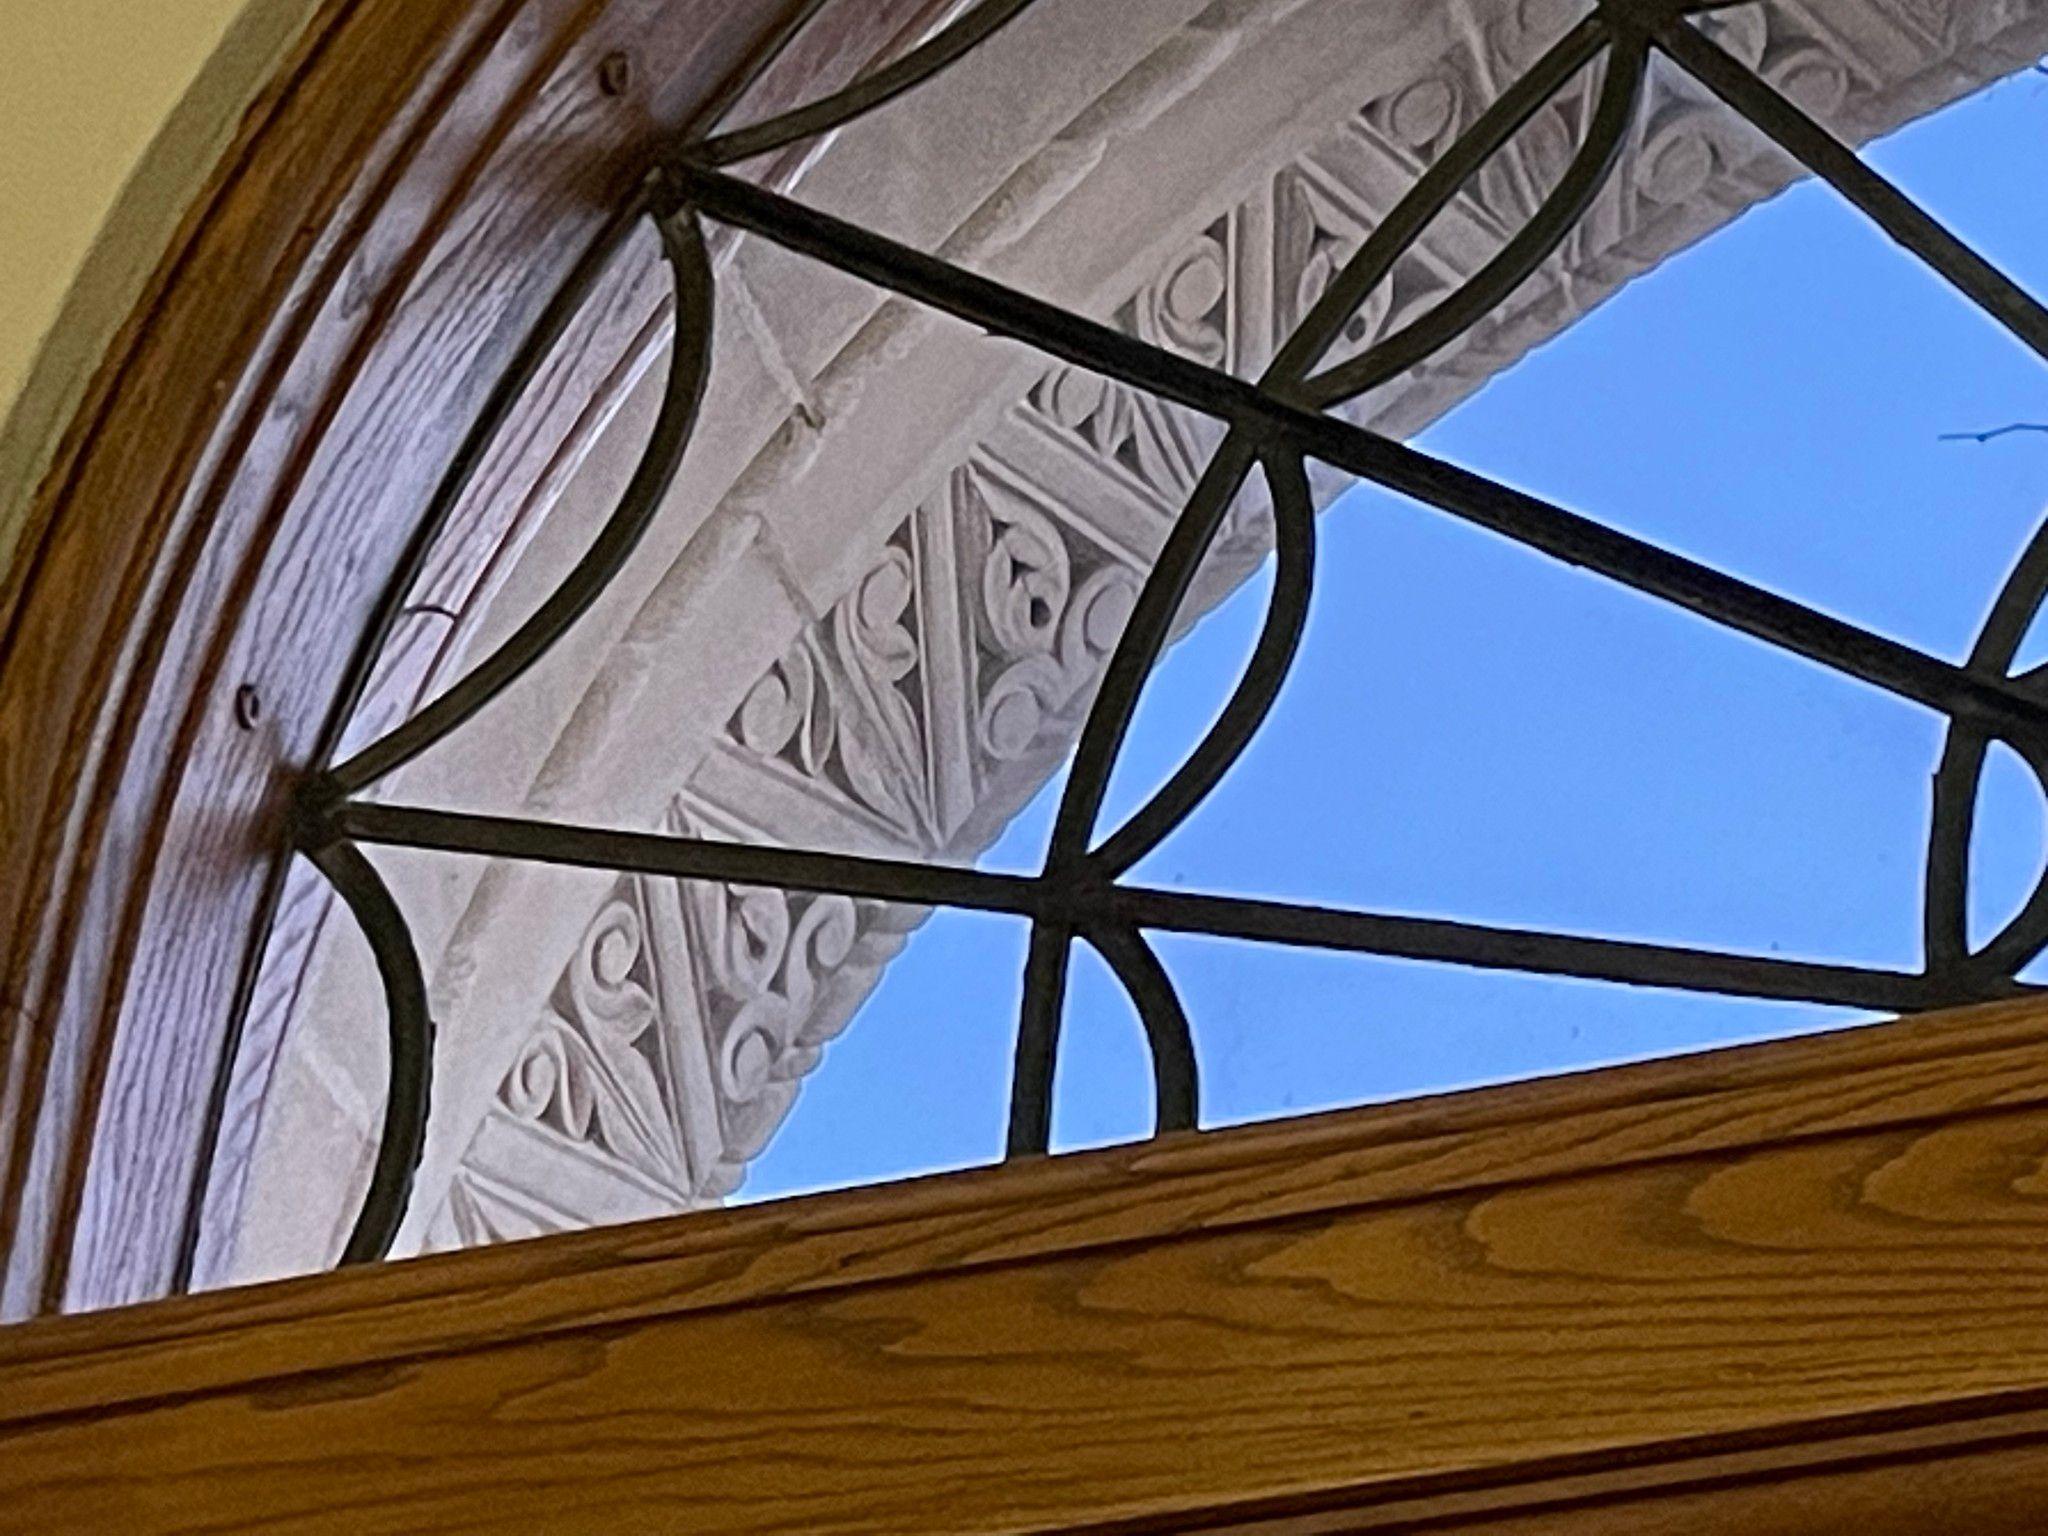 Photo of window above the library's entrance